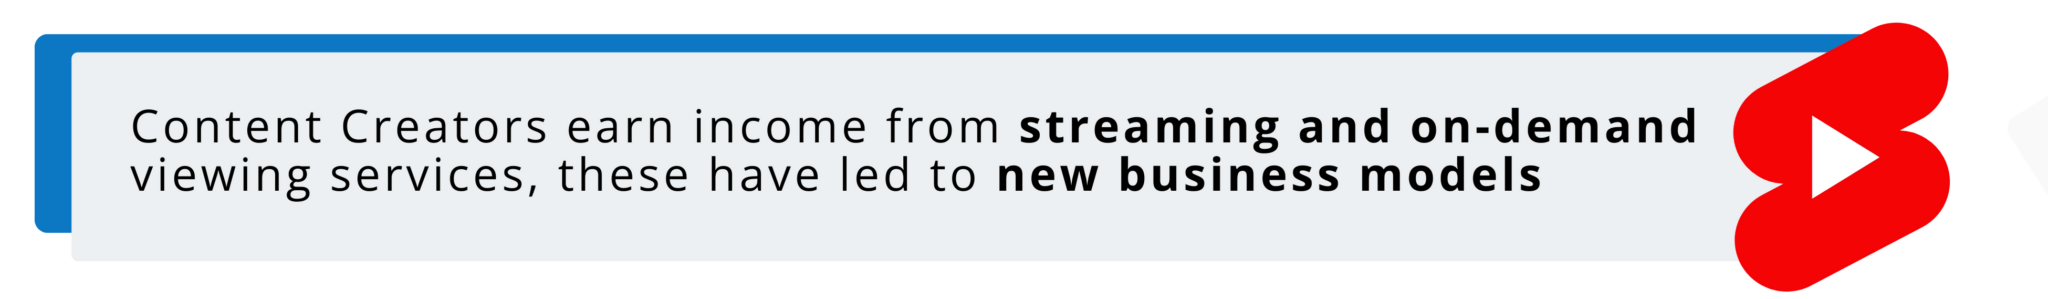 Content-Creators-can-use-New-Business-Models-in-streaming-services-to-earn-income